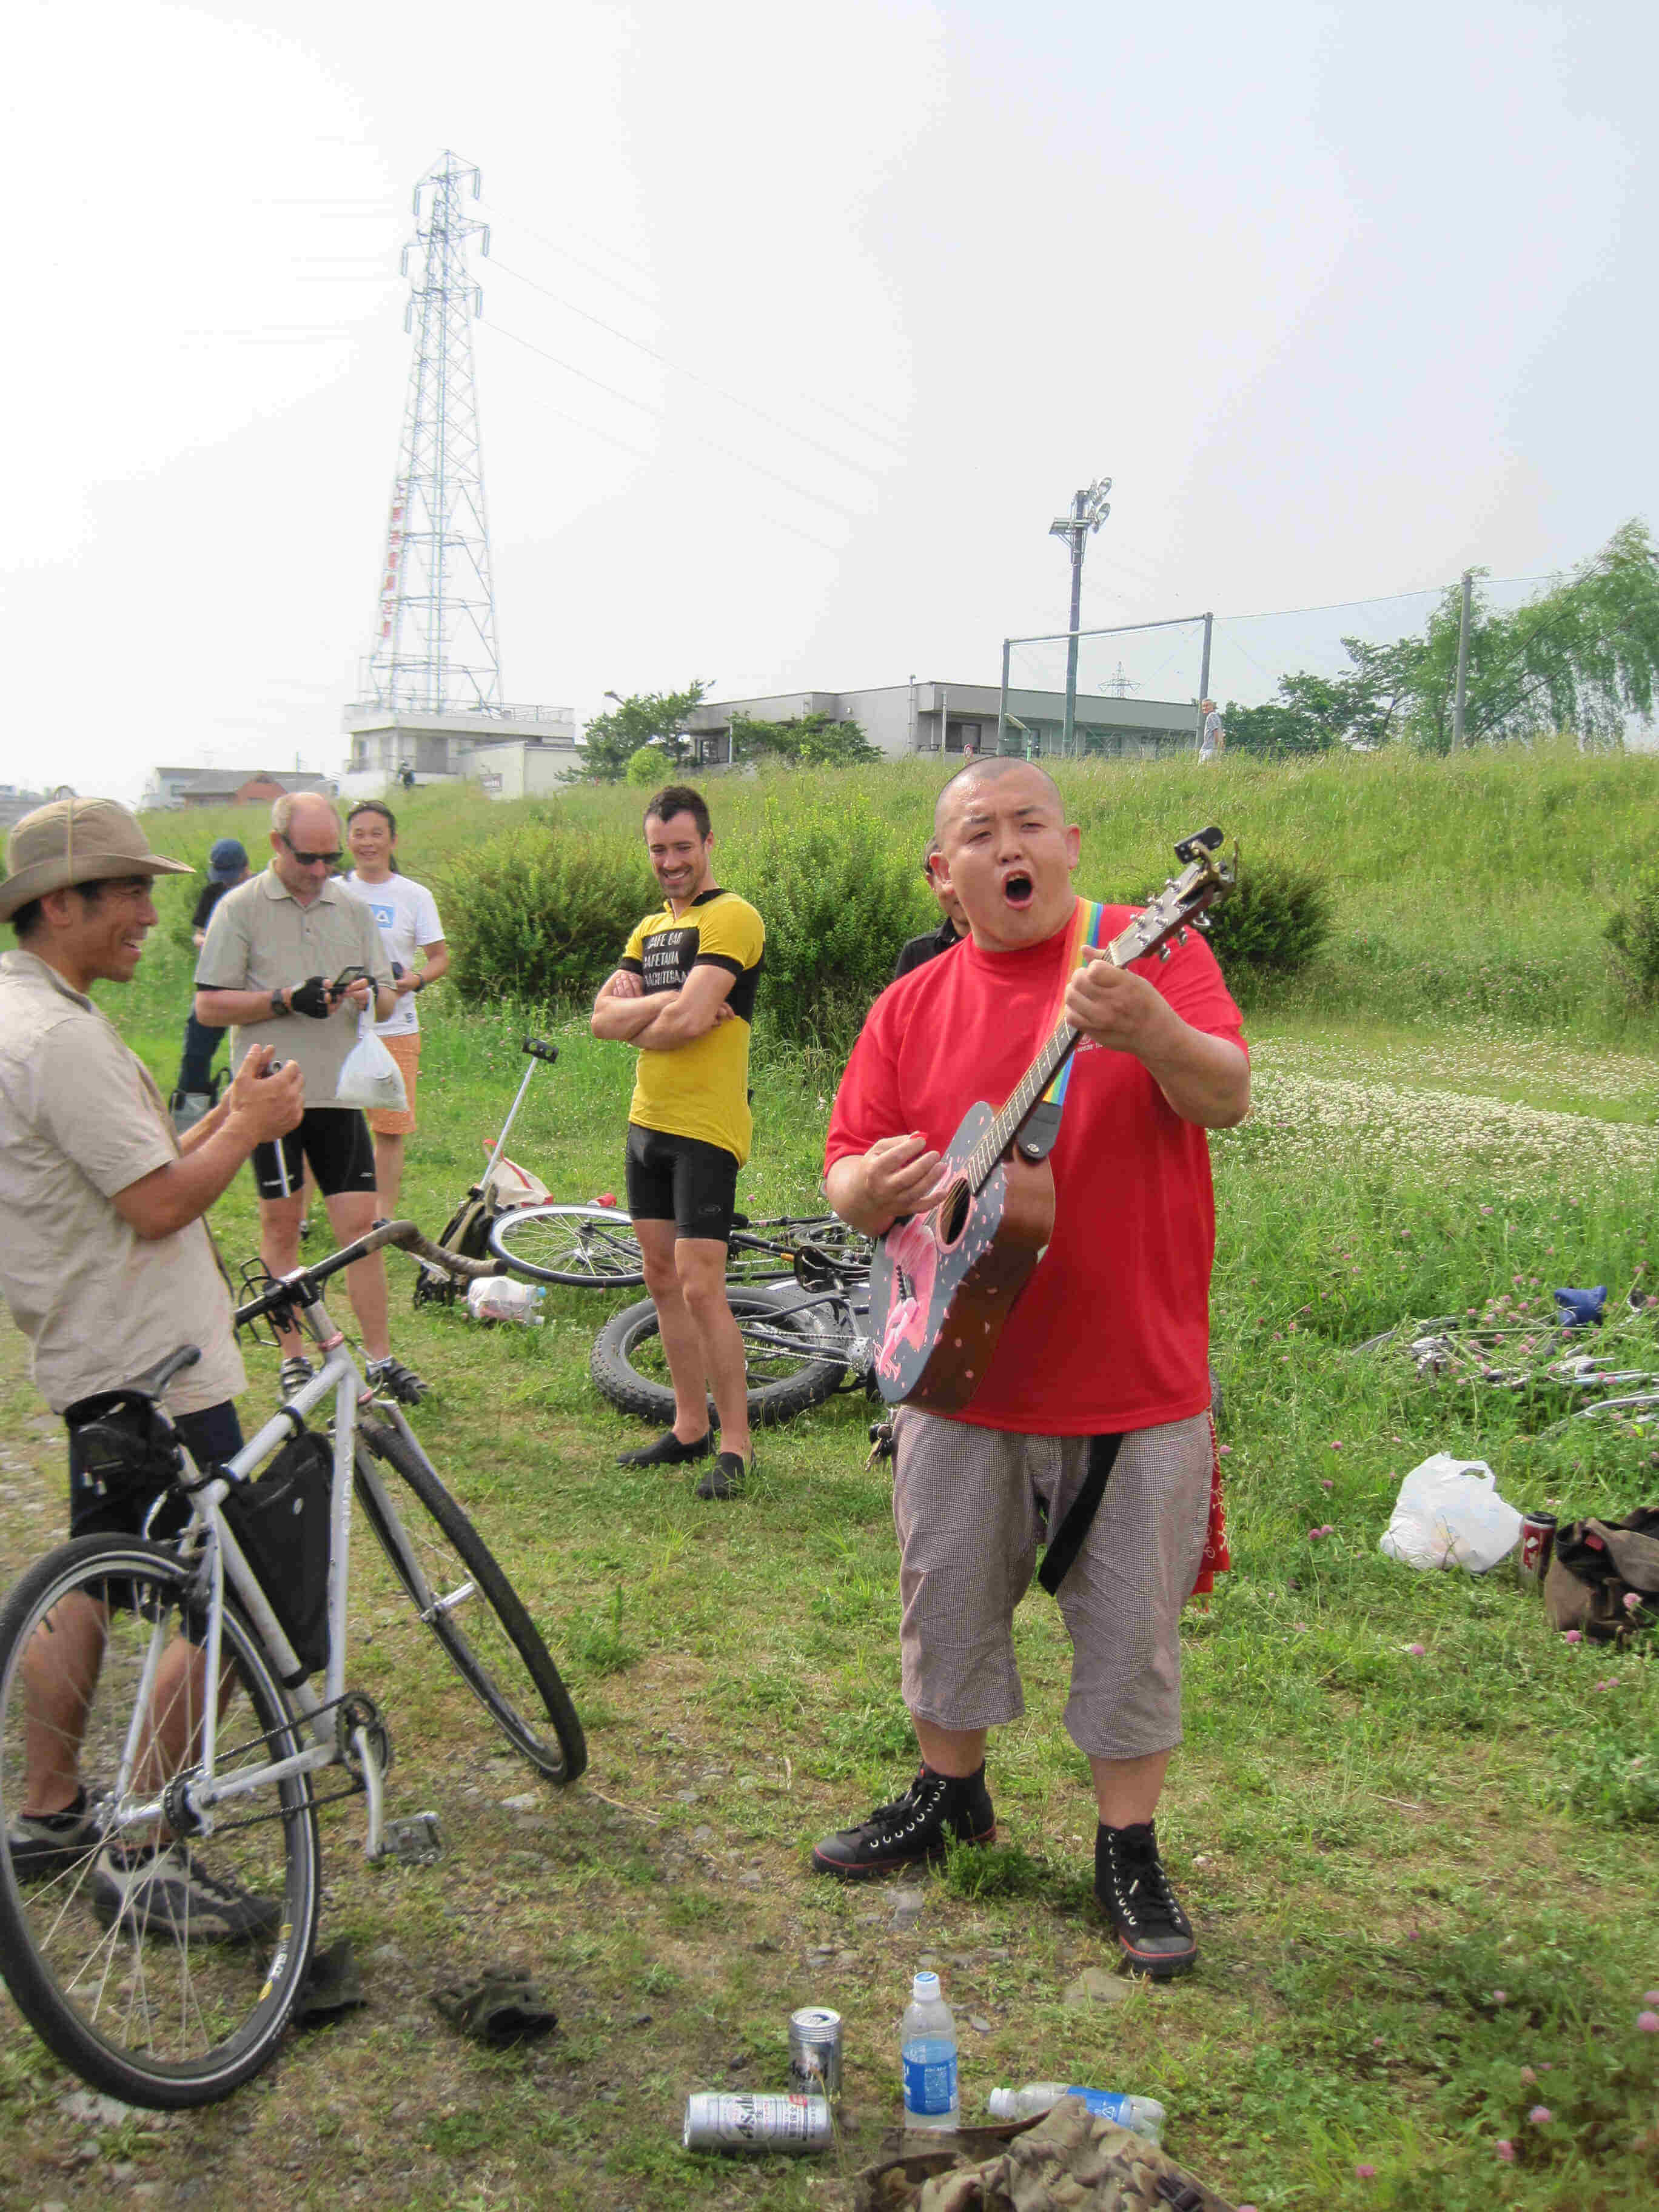 Front view of a person playing a guitar and singing, in a grass field, with bikes and cyclists around them